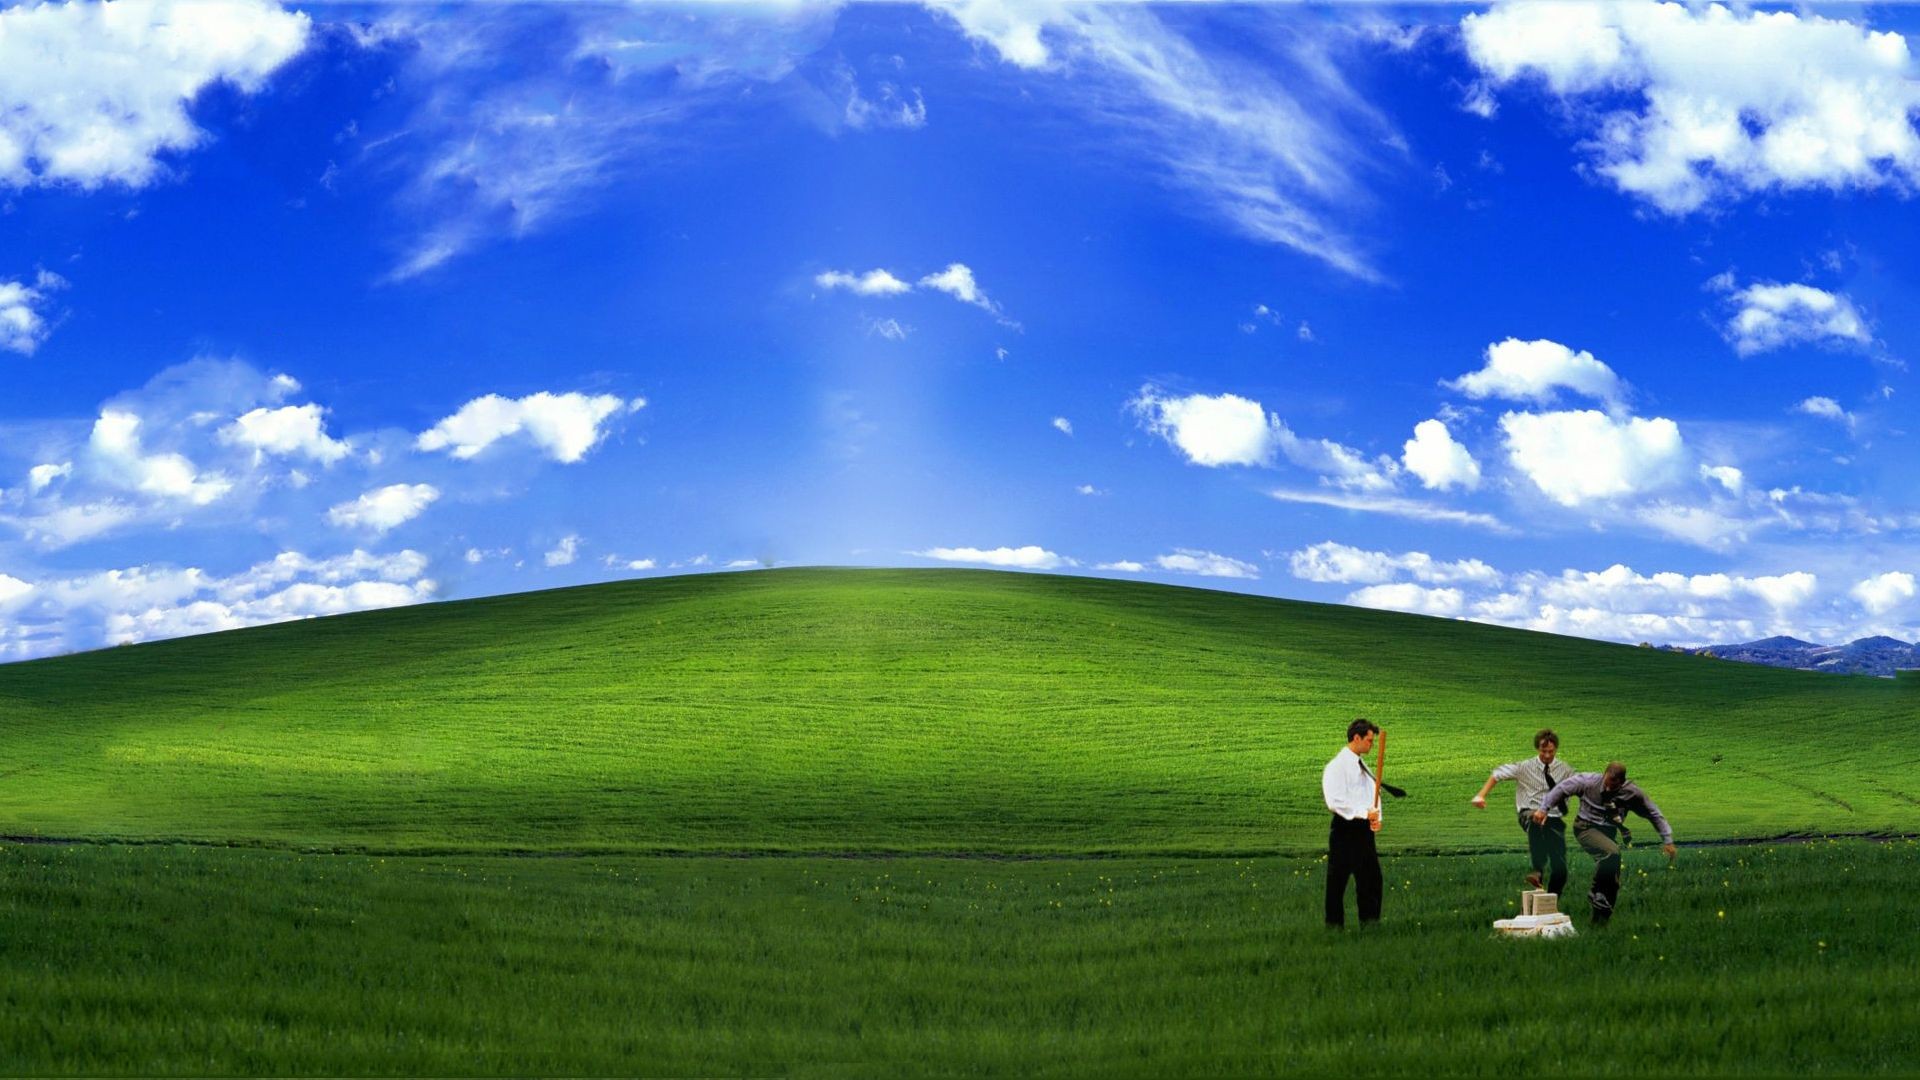 Office Space Windows Background Wallpaper